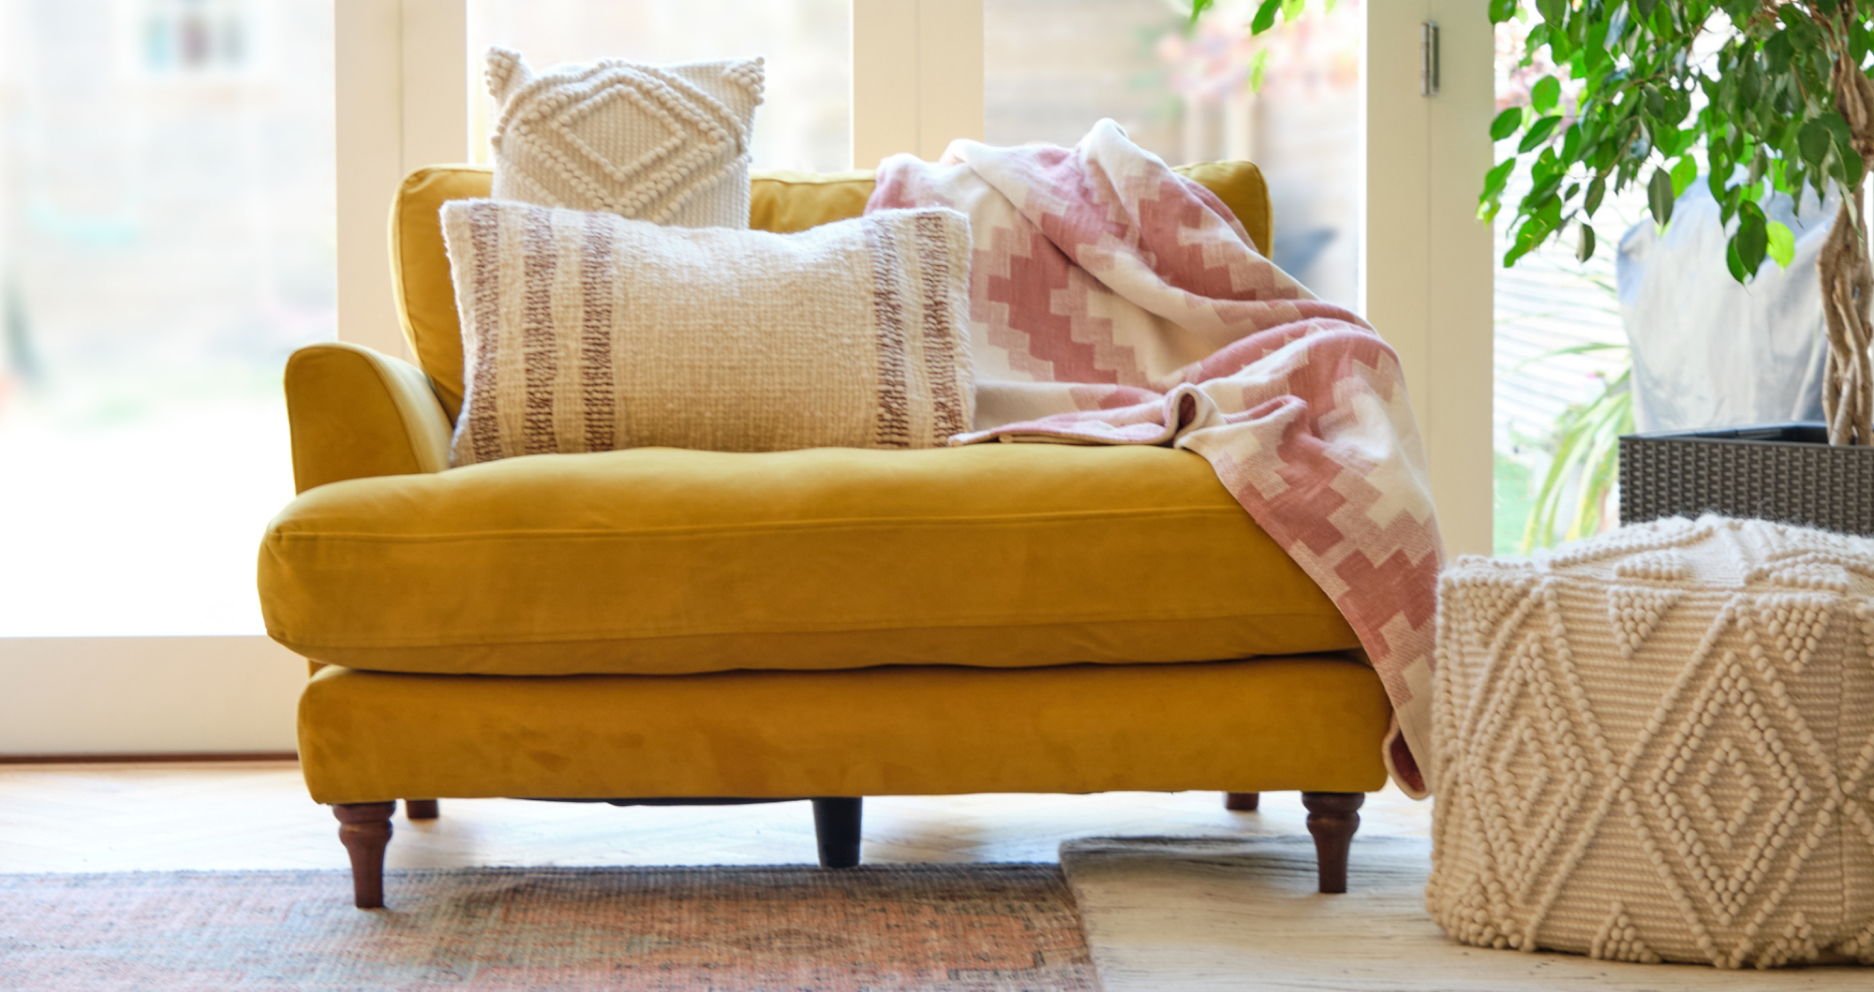 Cosy image of light and bright living space with stylish footstool and matching cushions